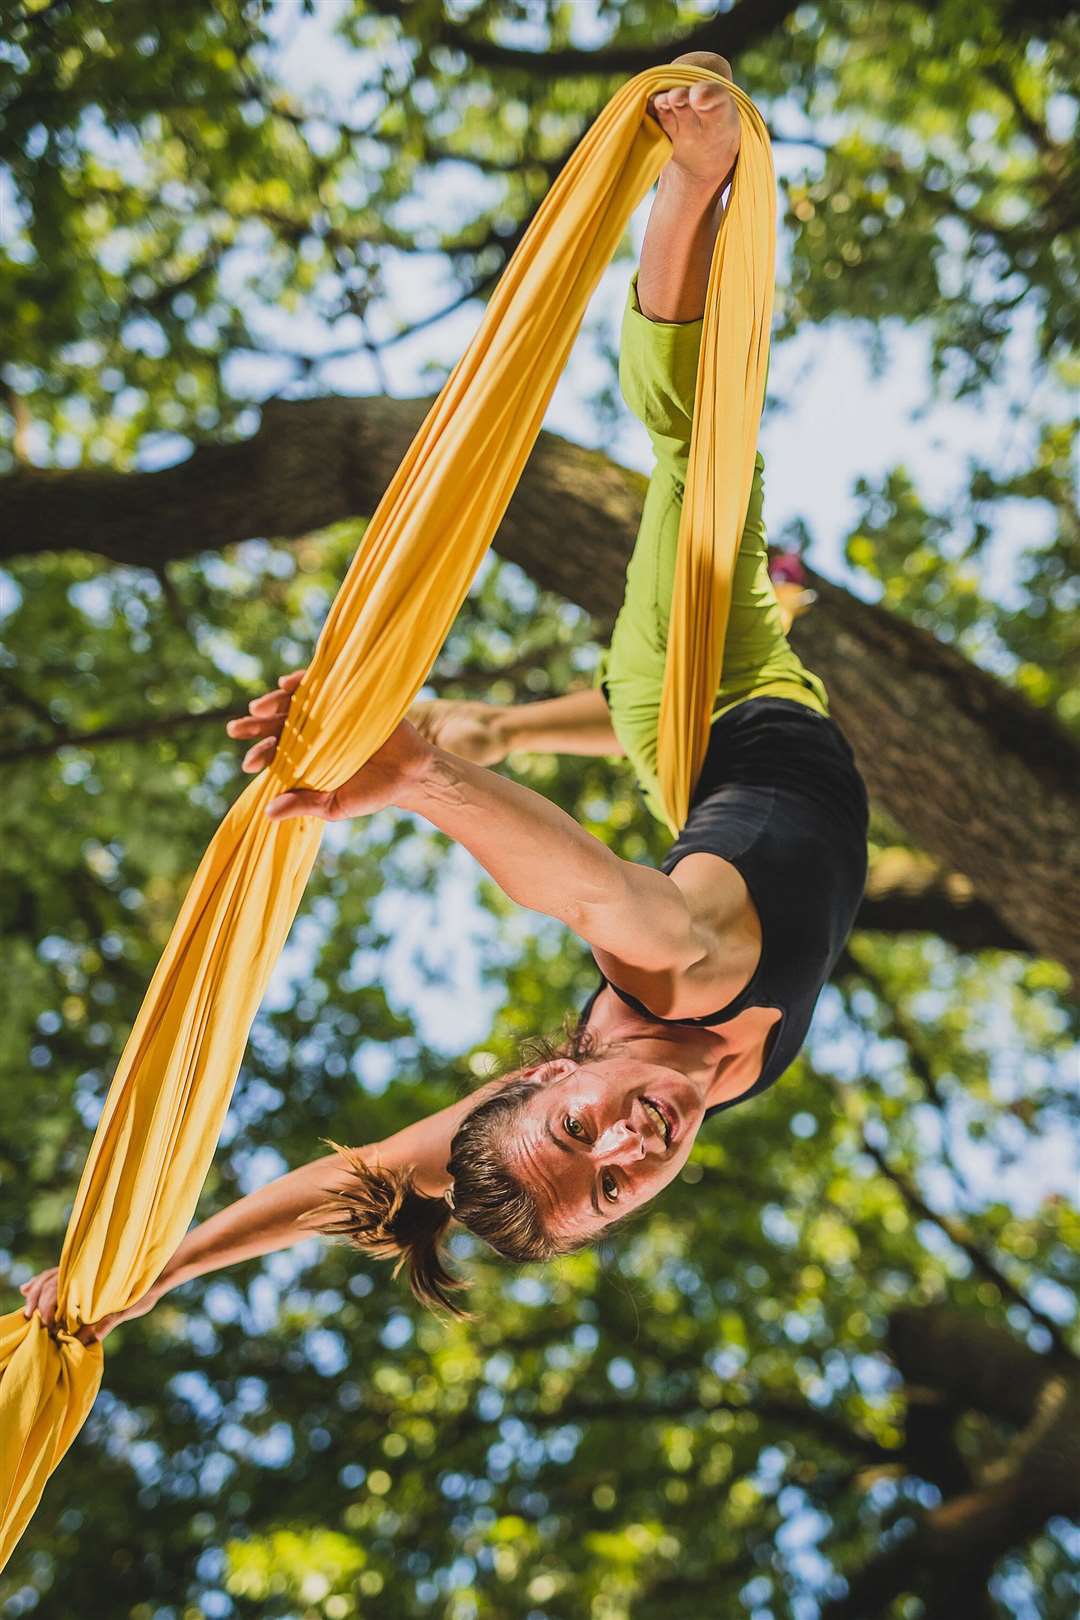 Some clips were compared with videos of human aerial silks performances (Alamy/PA)